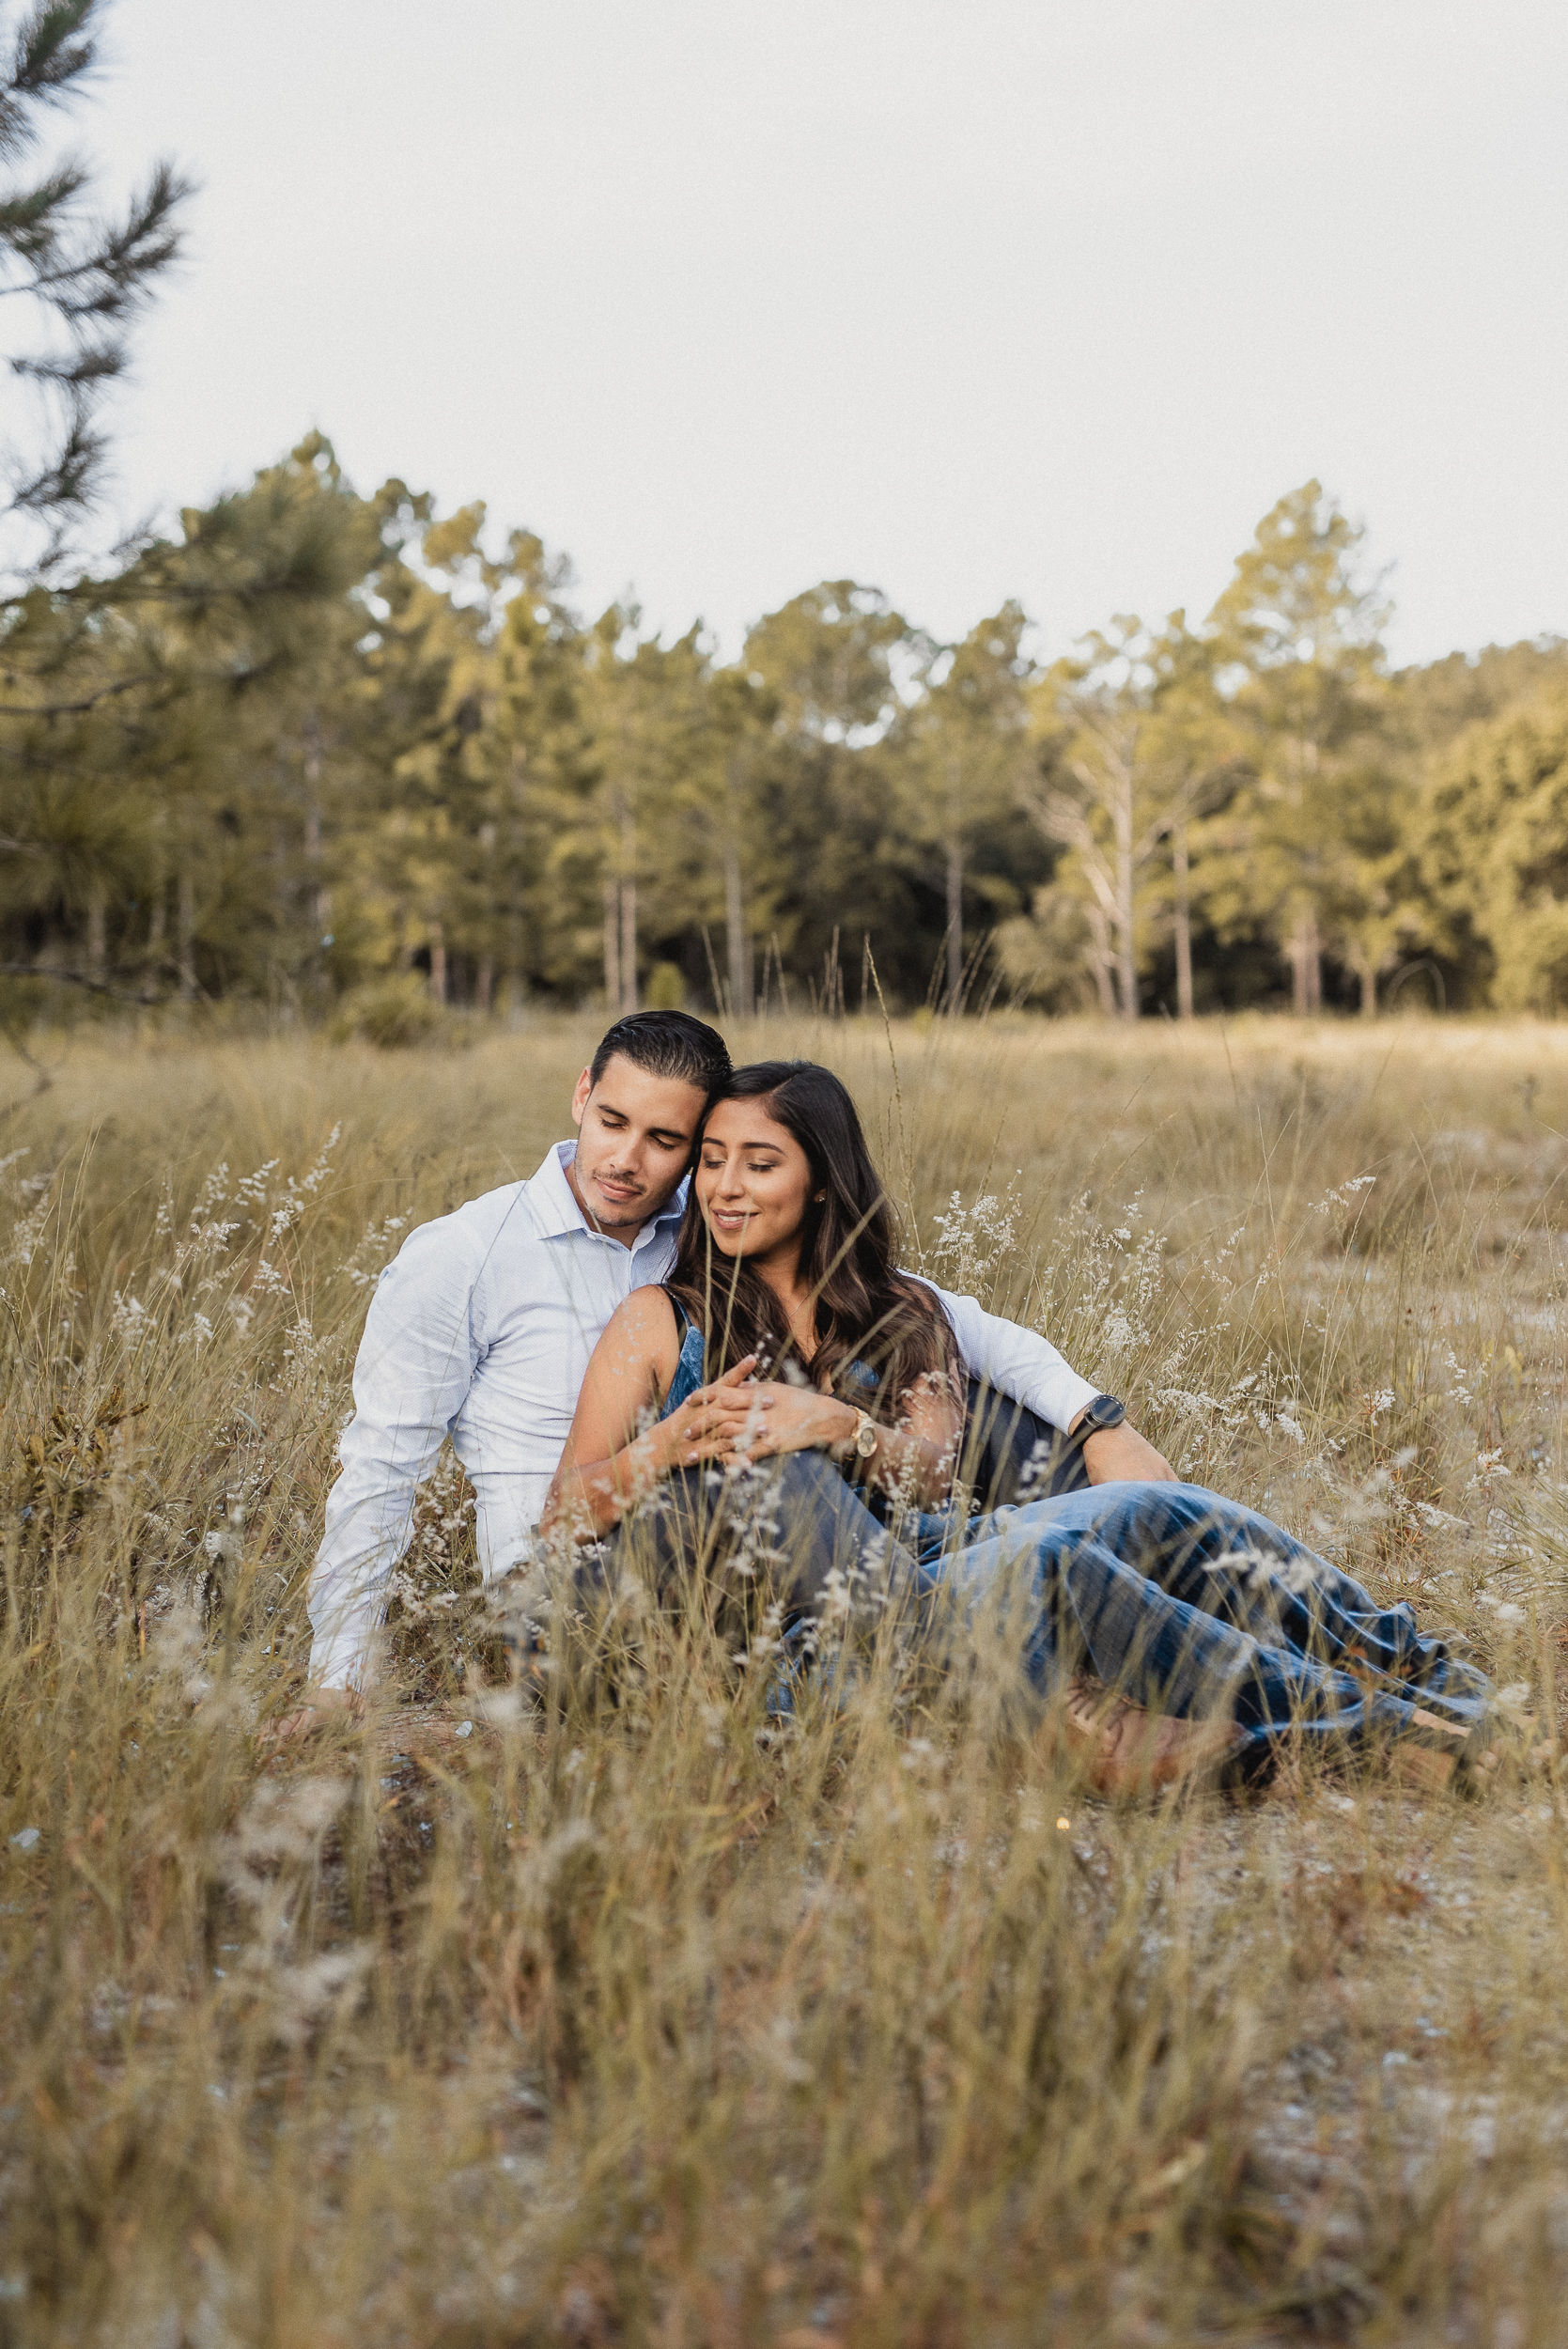 Lake Louisa State Park Couples Photoshoot- Best Engagement Spots in Orlando Florida